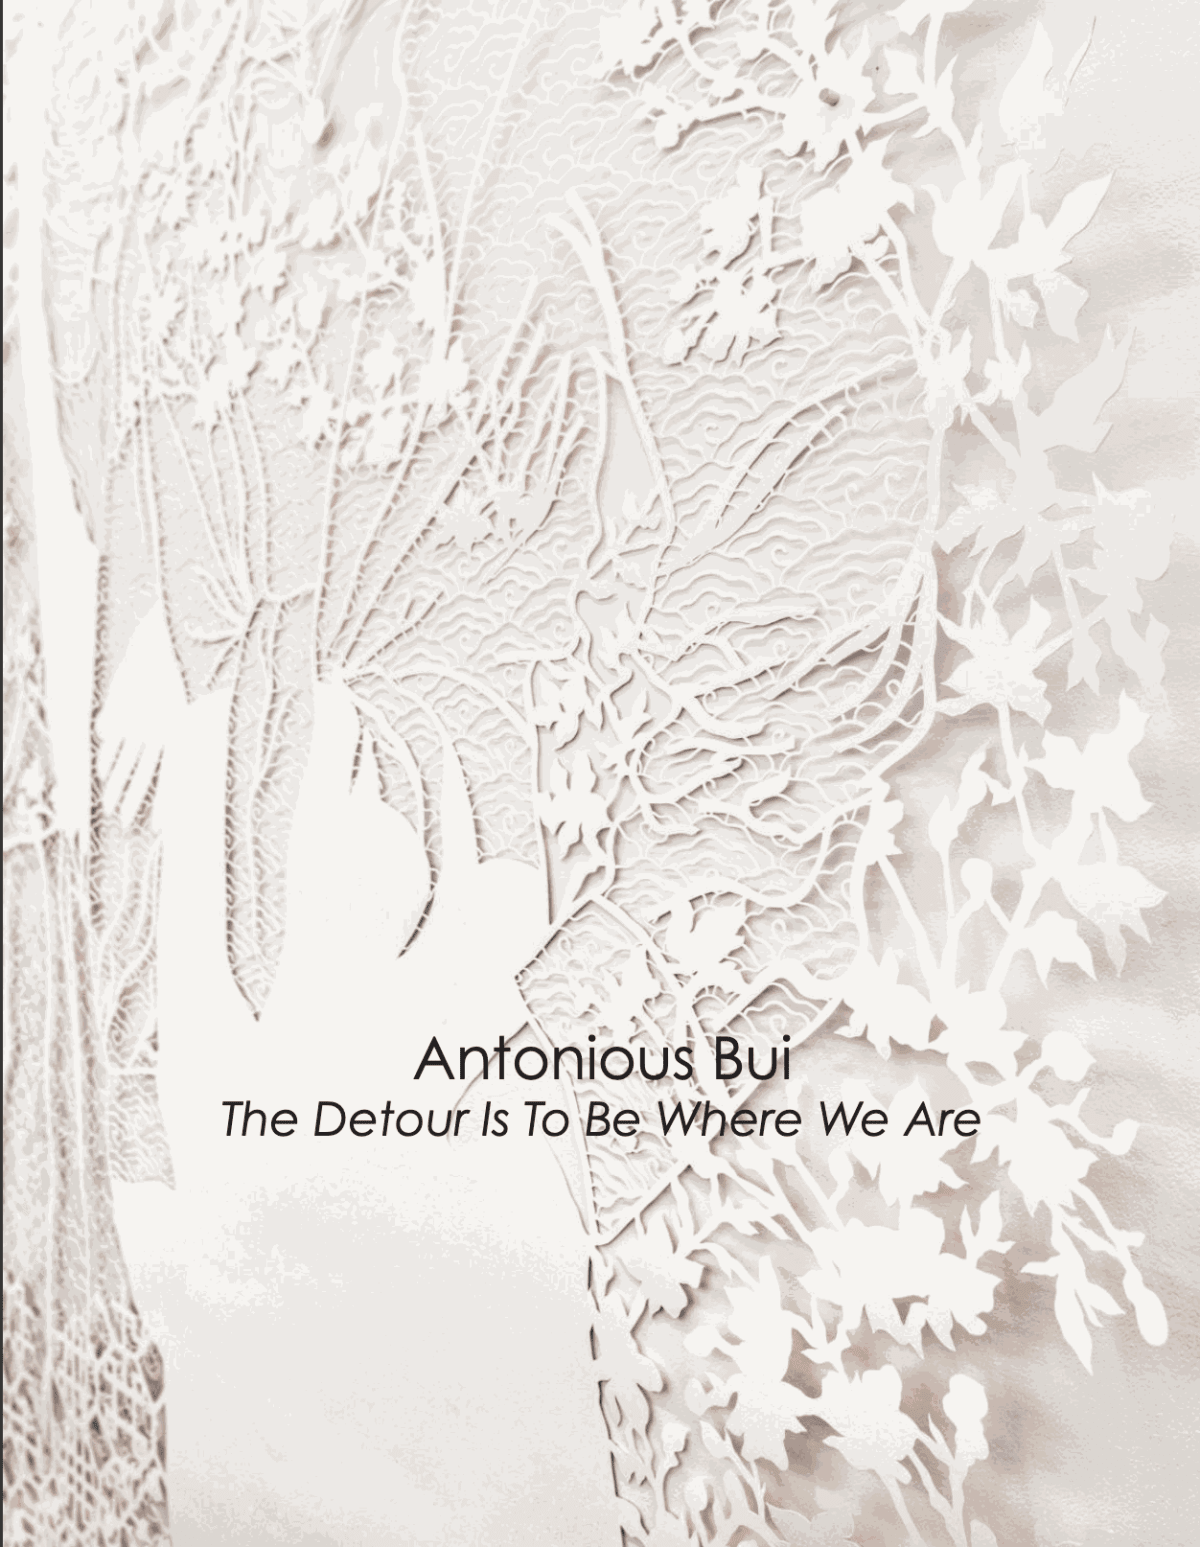 Antonius Bui: The Detour Is To Be Where We Are